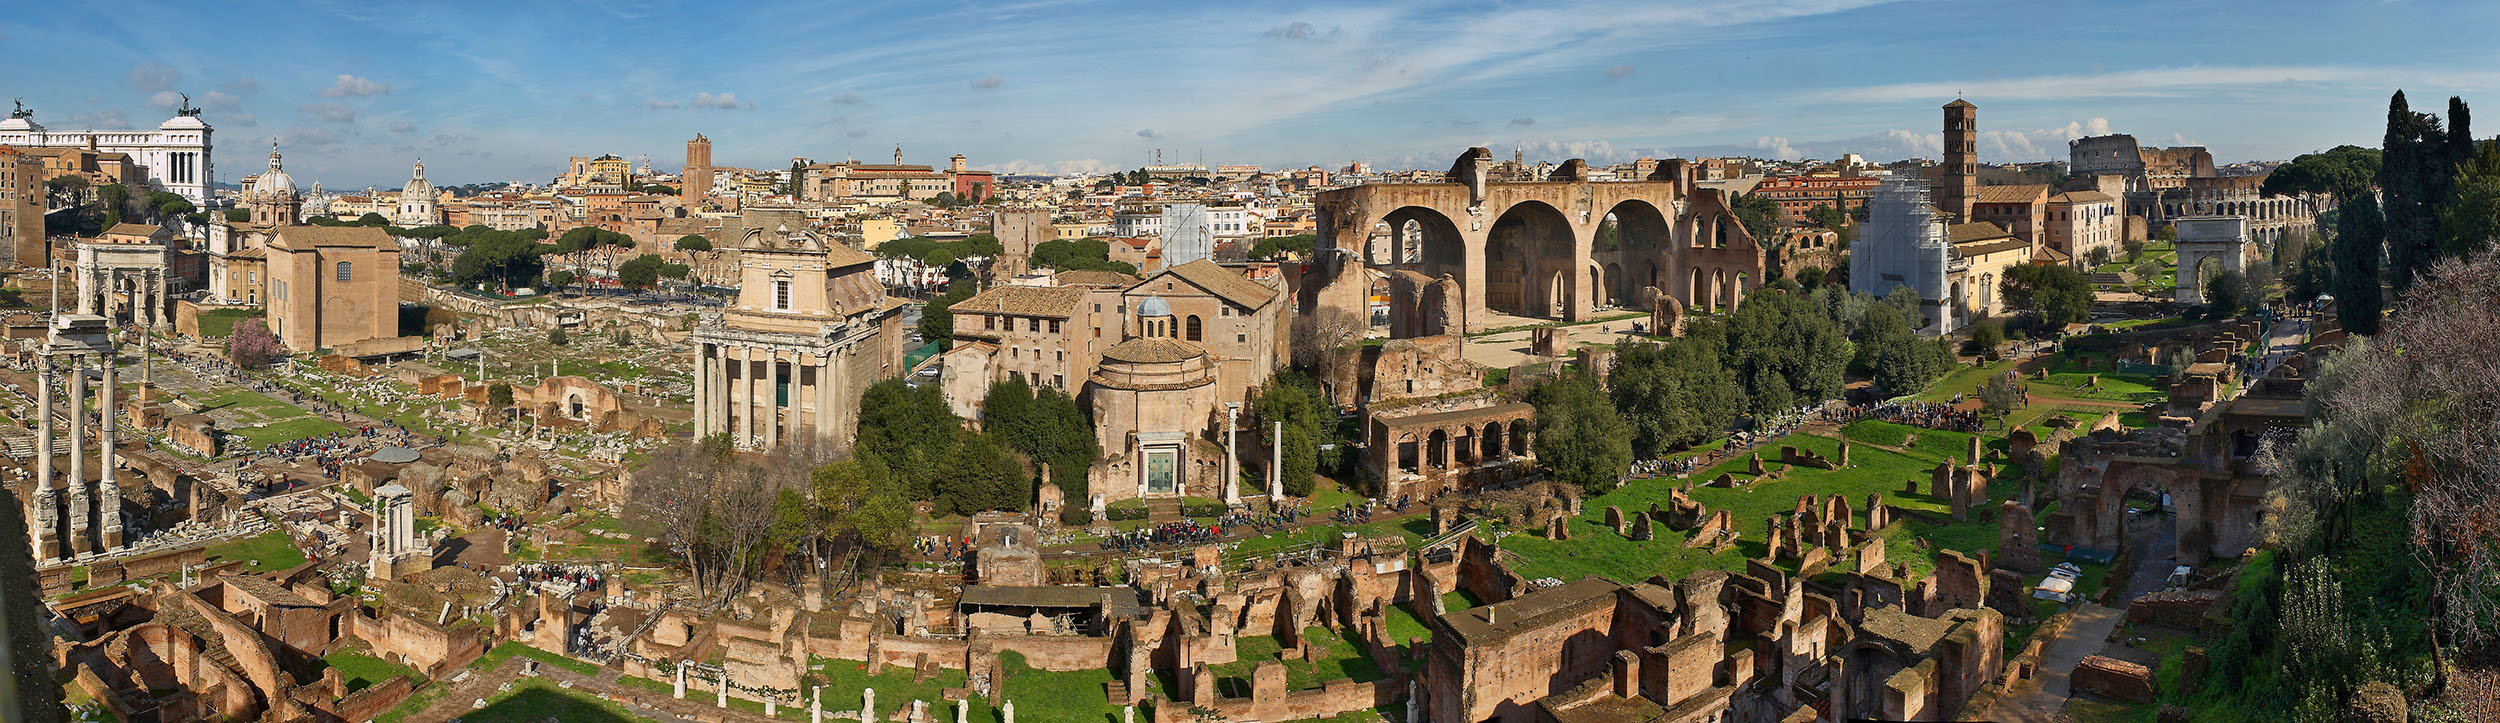 Forum Romanum view from the Palatine Hill